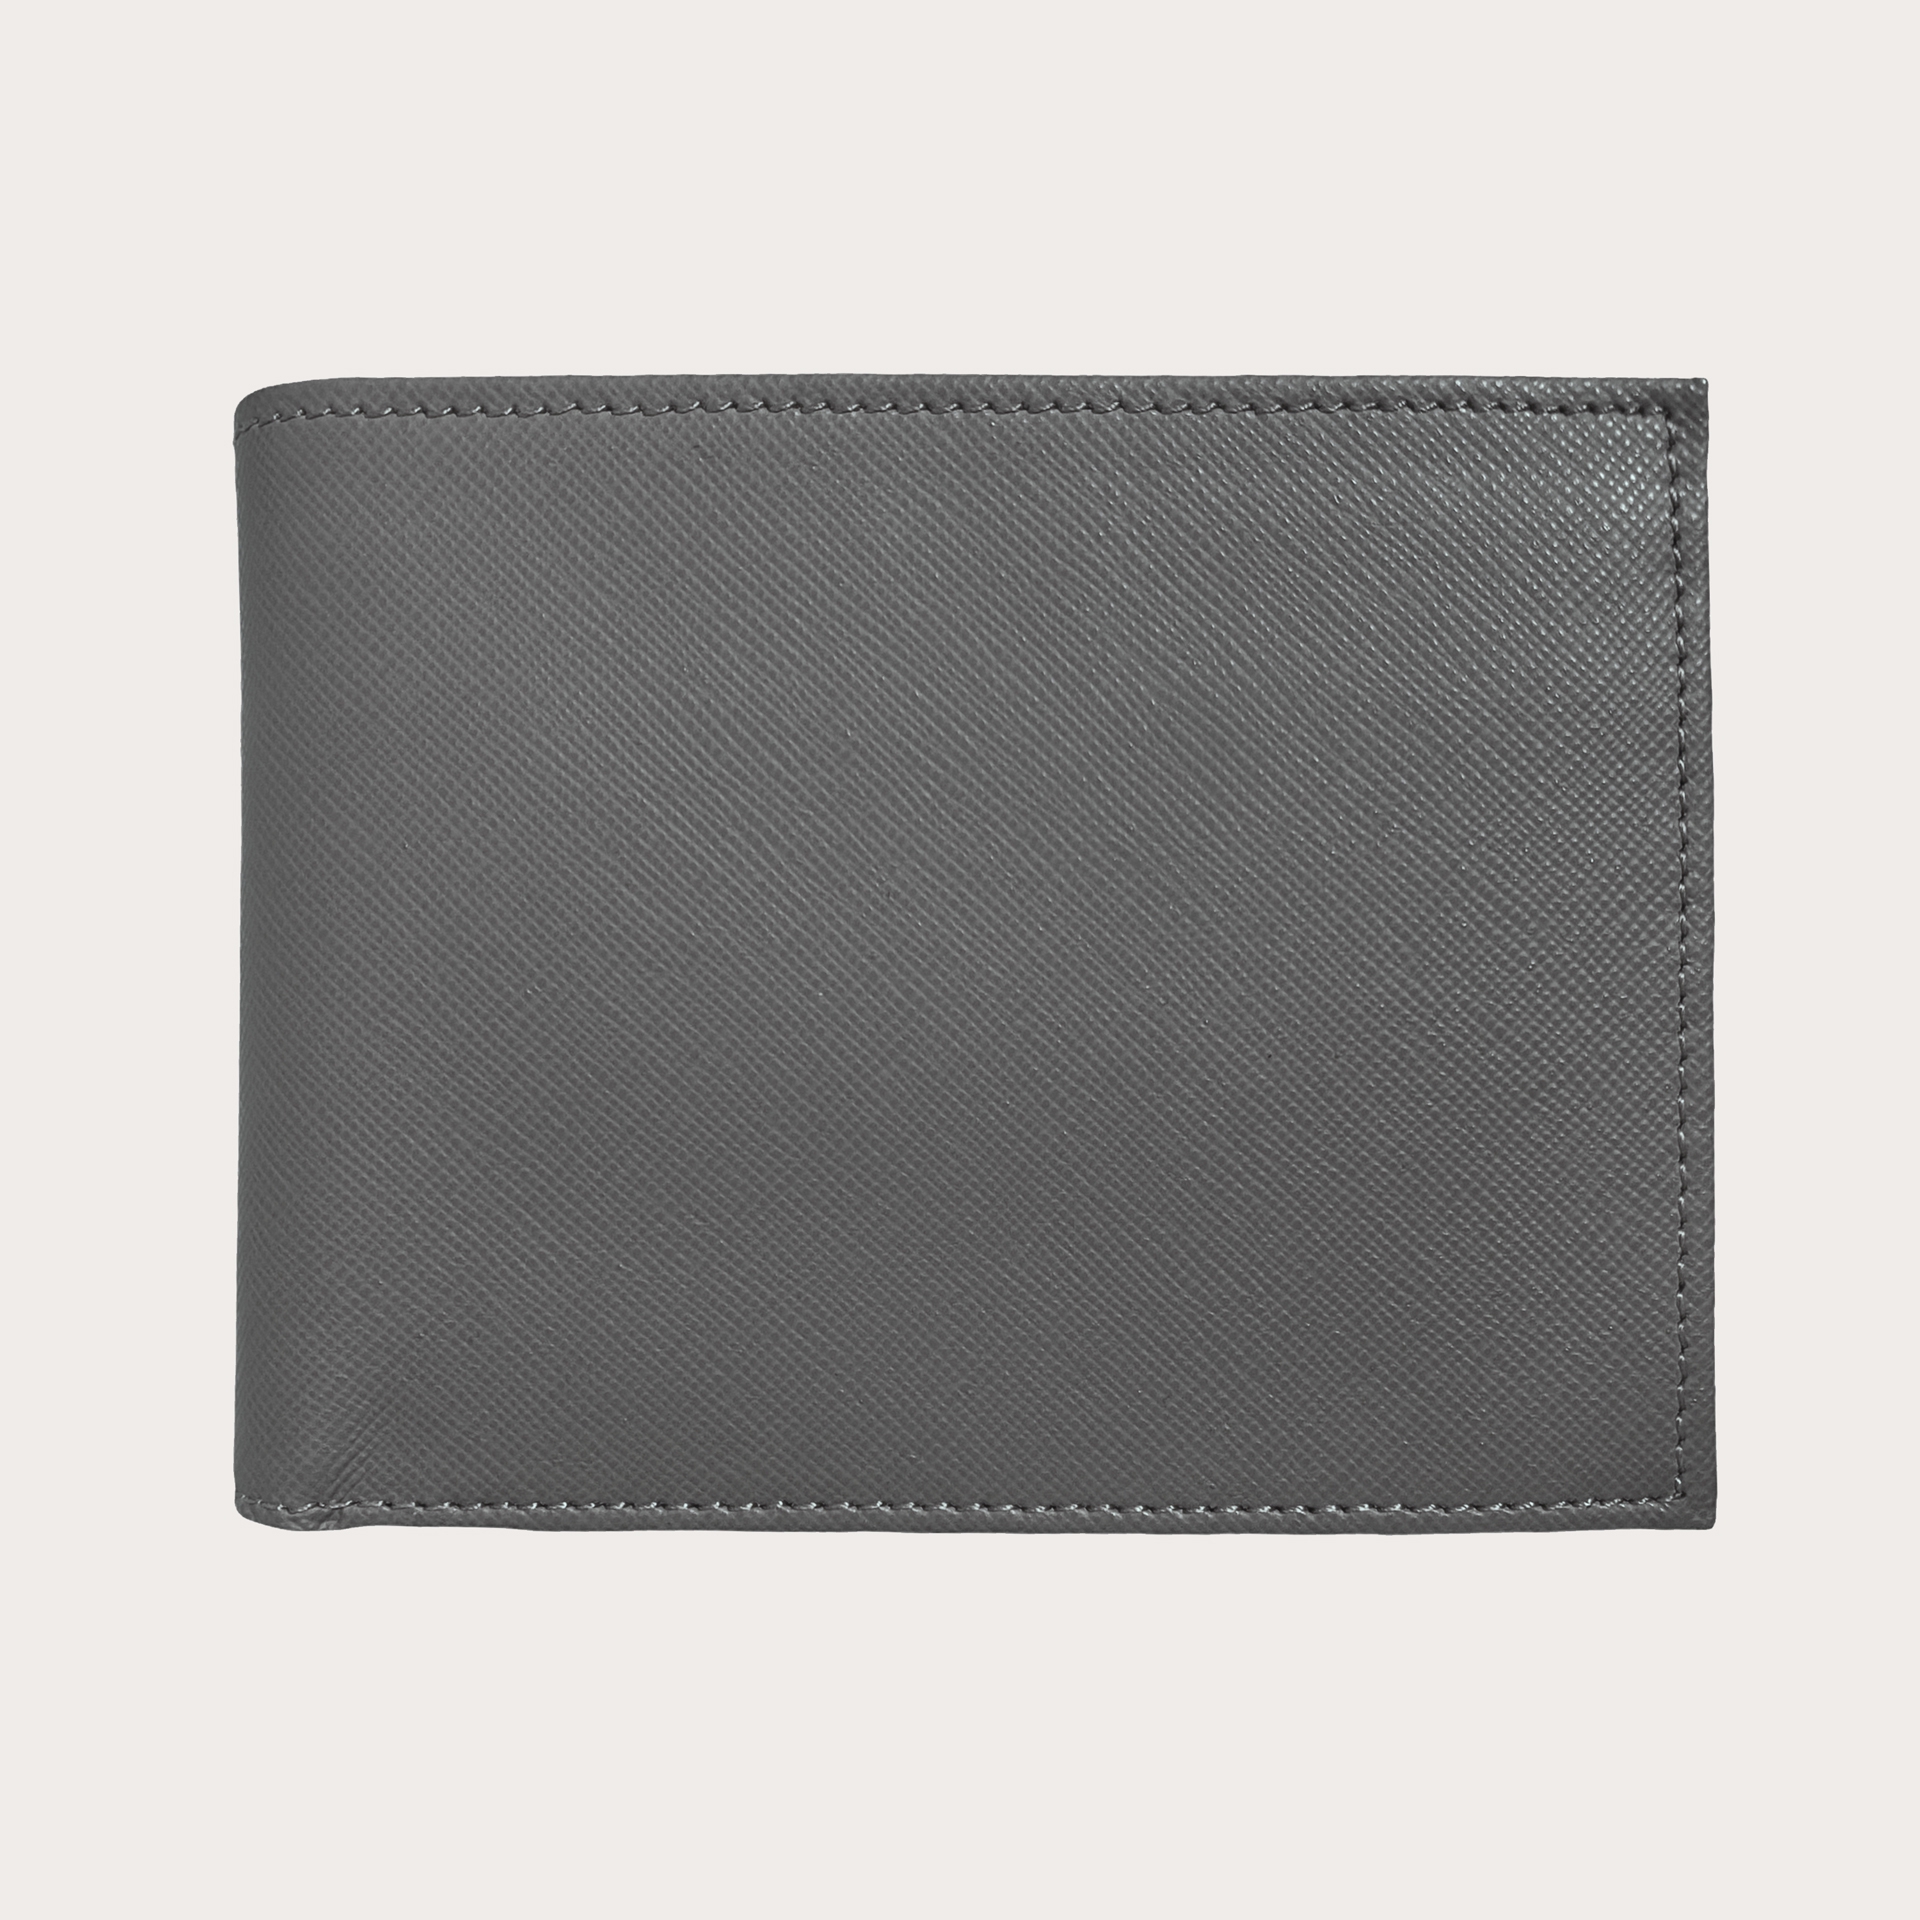 Brucle Men's bifold leather wallet with coin purse, saffiano grey